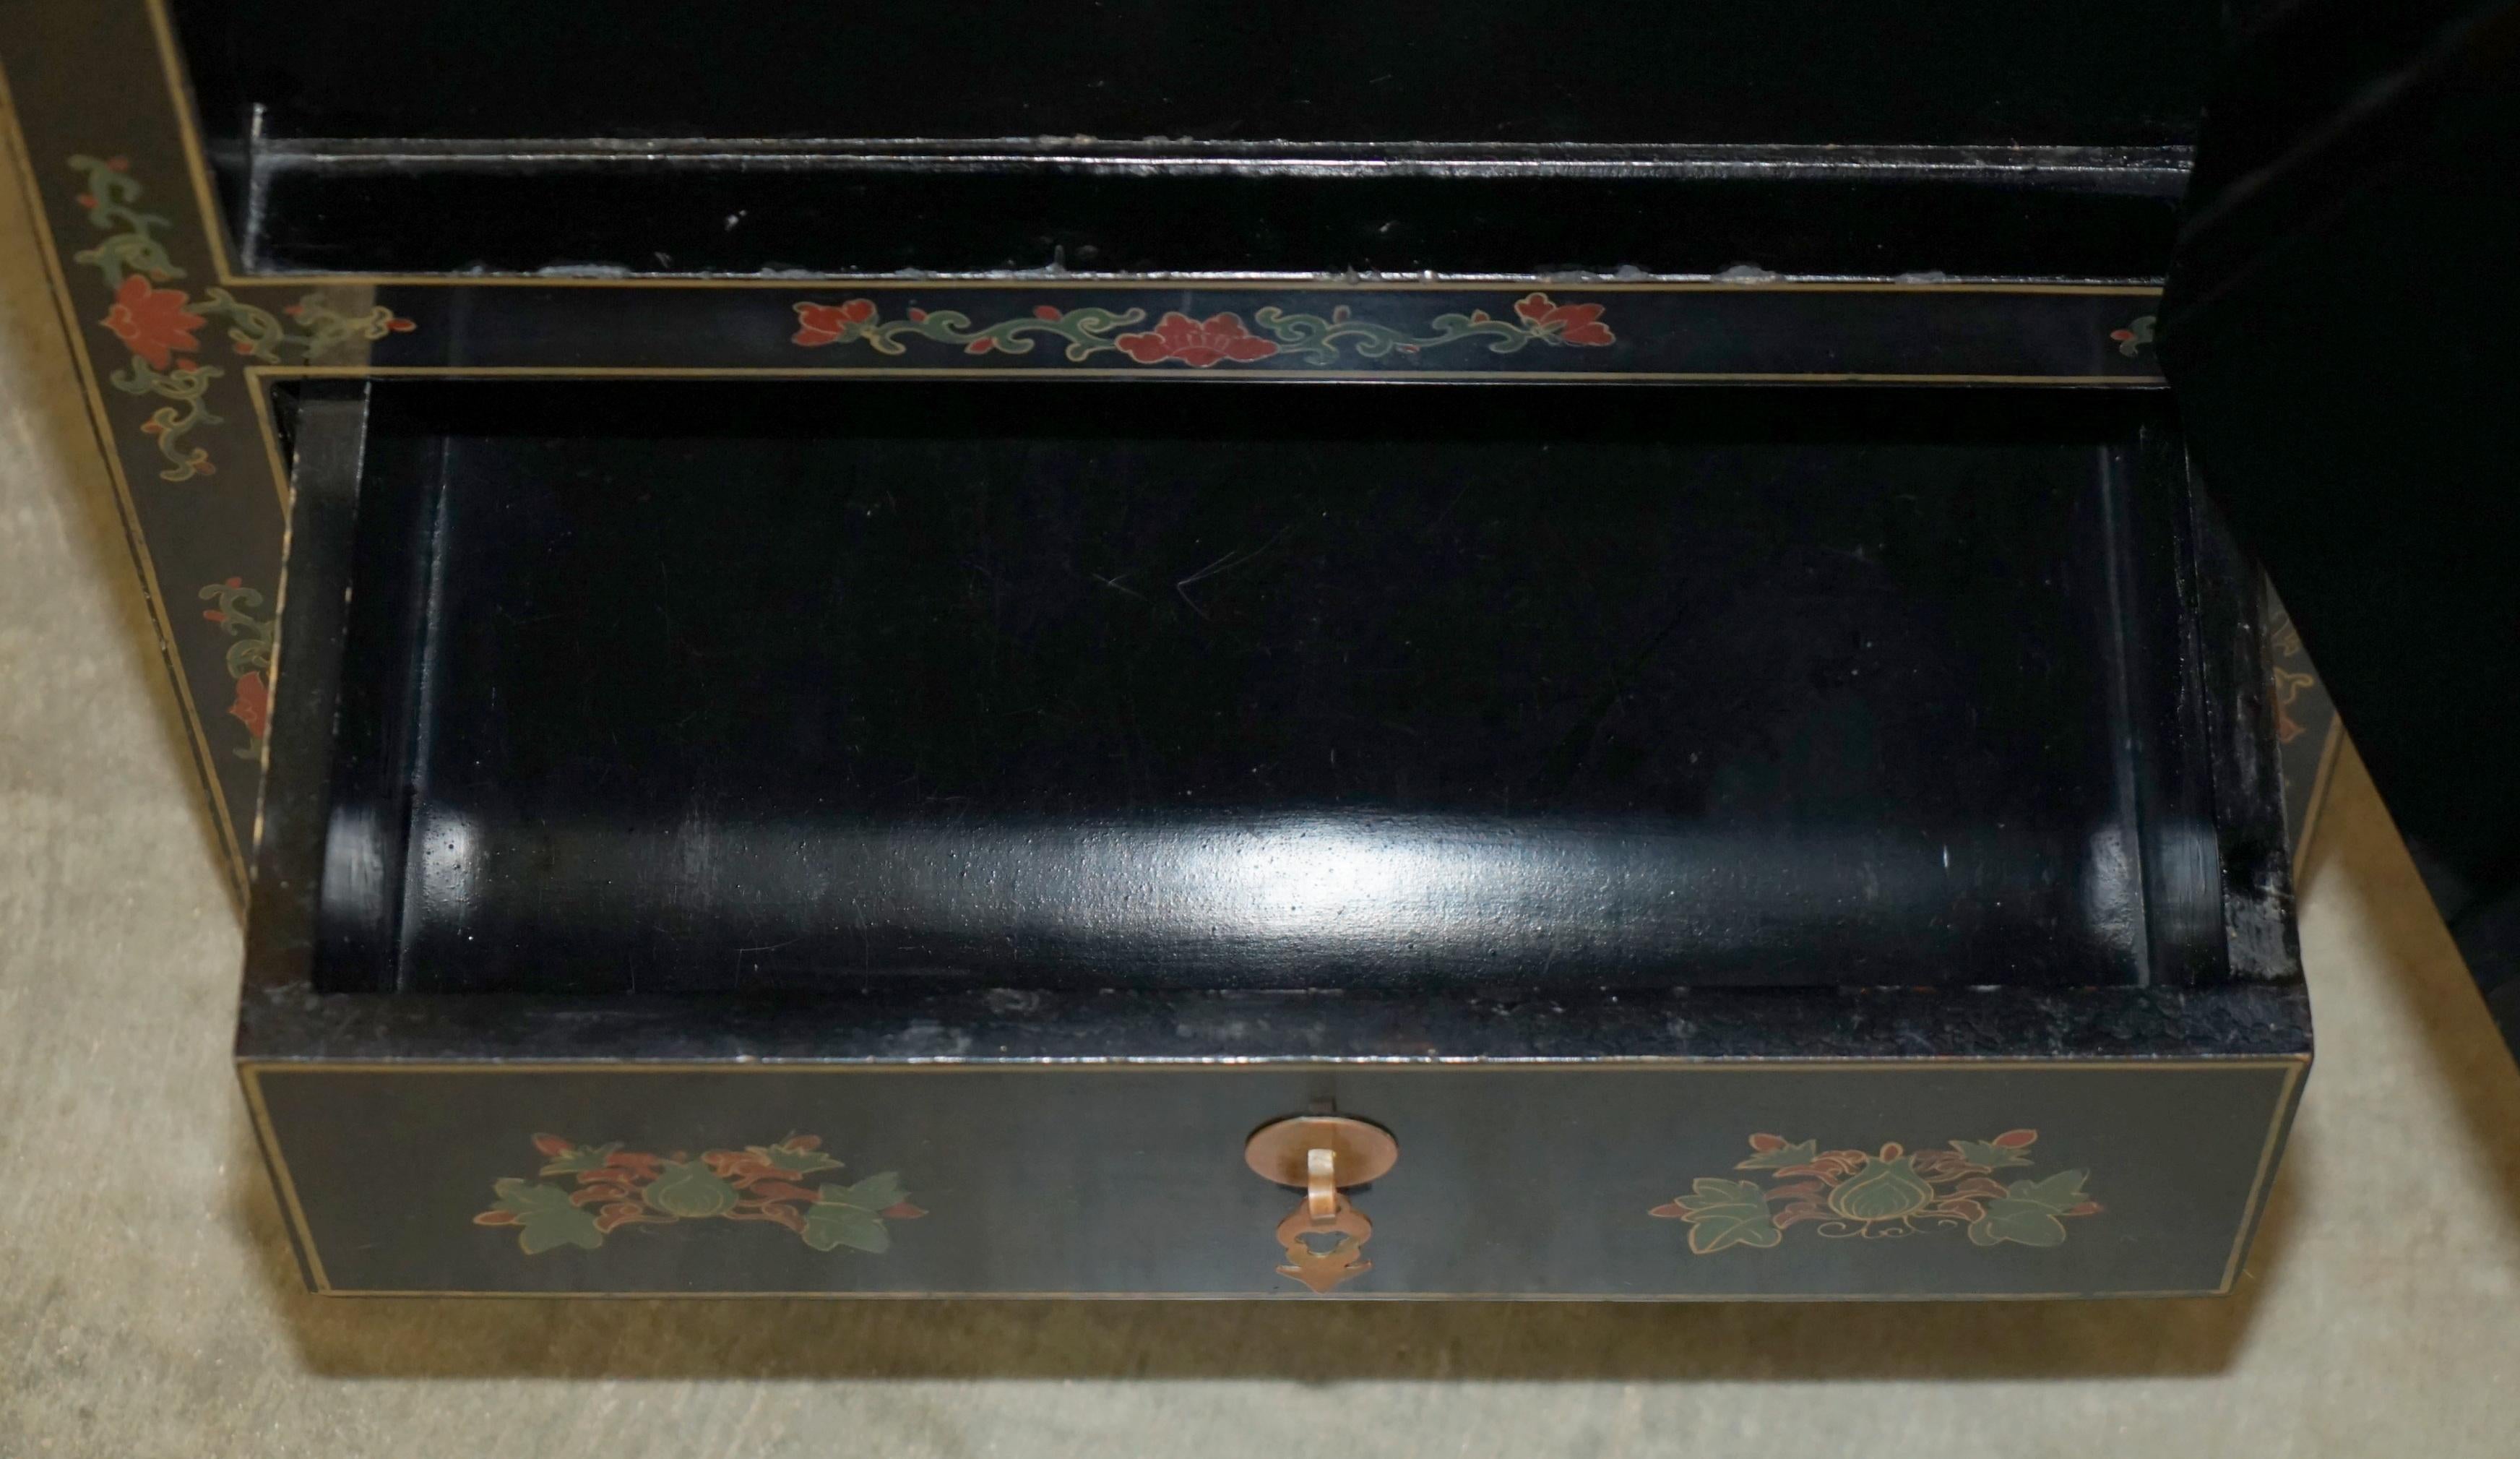 LOVELY ViNTAGE CHINESE CHINOISERIE SAMURAI WARRIOR LACQUER SIDE CABINET SOAPSTON im Angebot 9